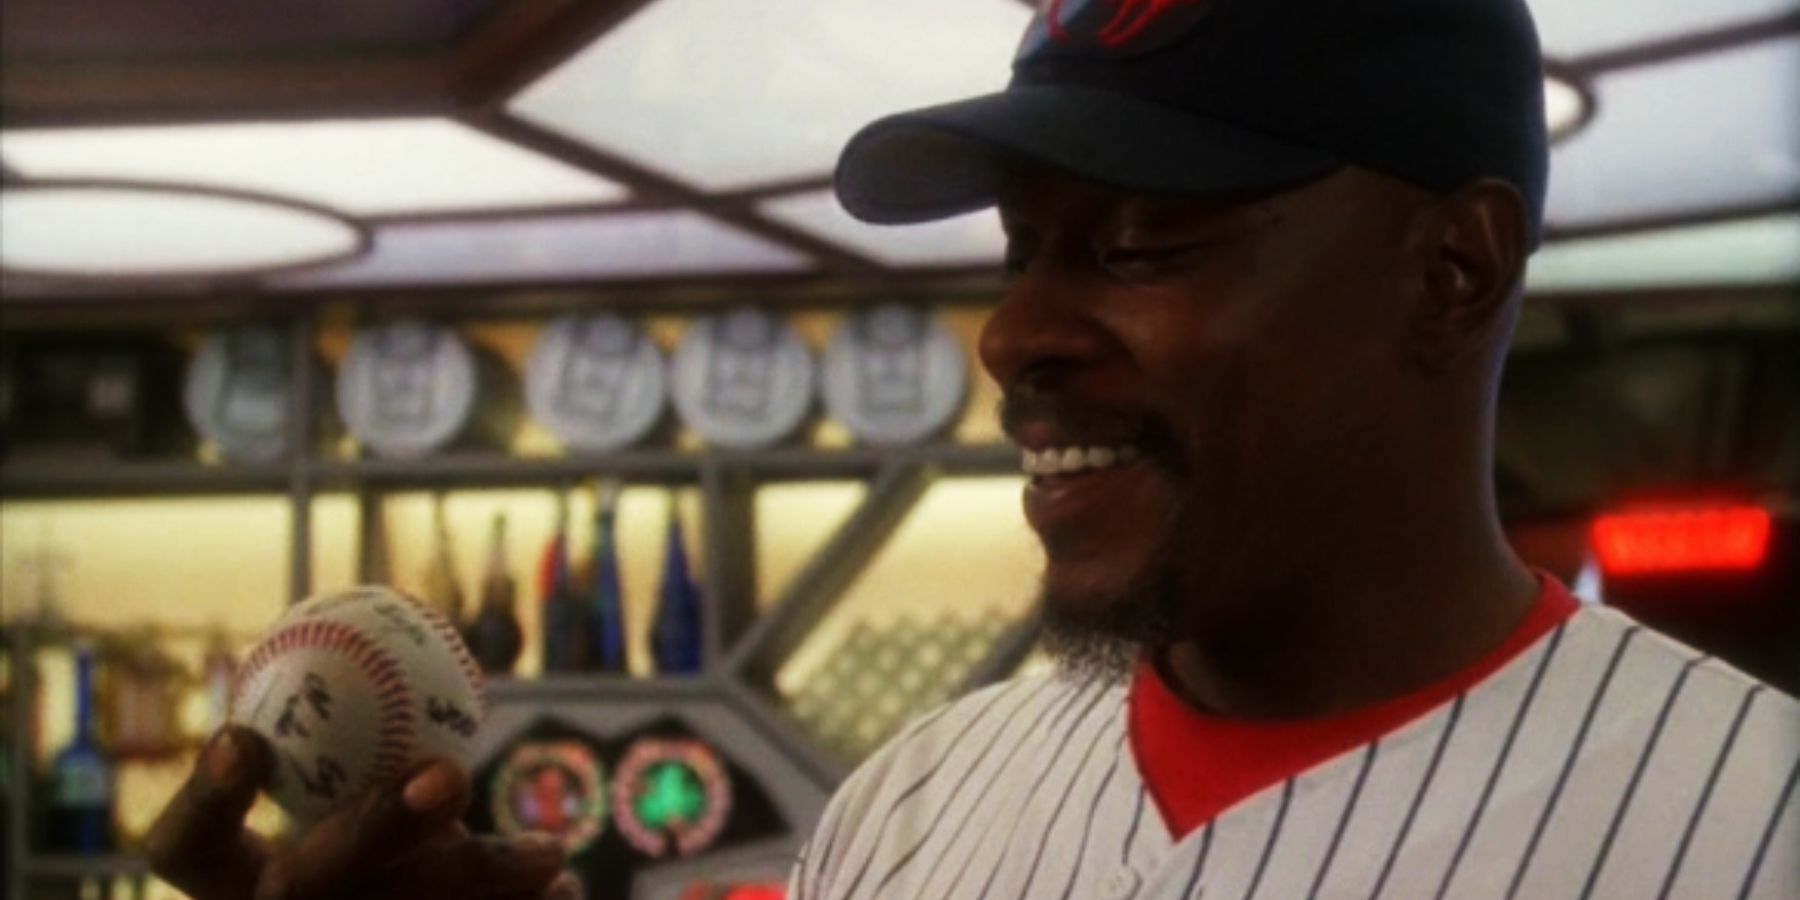 Captain Benjamin Sisko's signed baseball from Take Me Out to the Holosuite